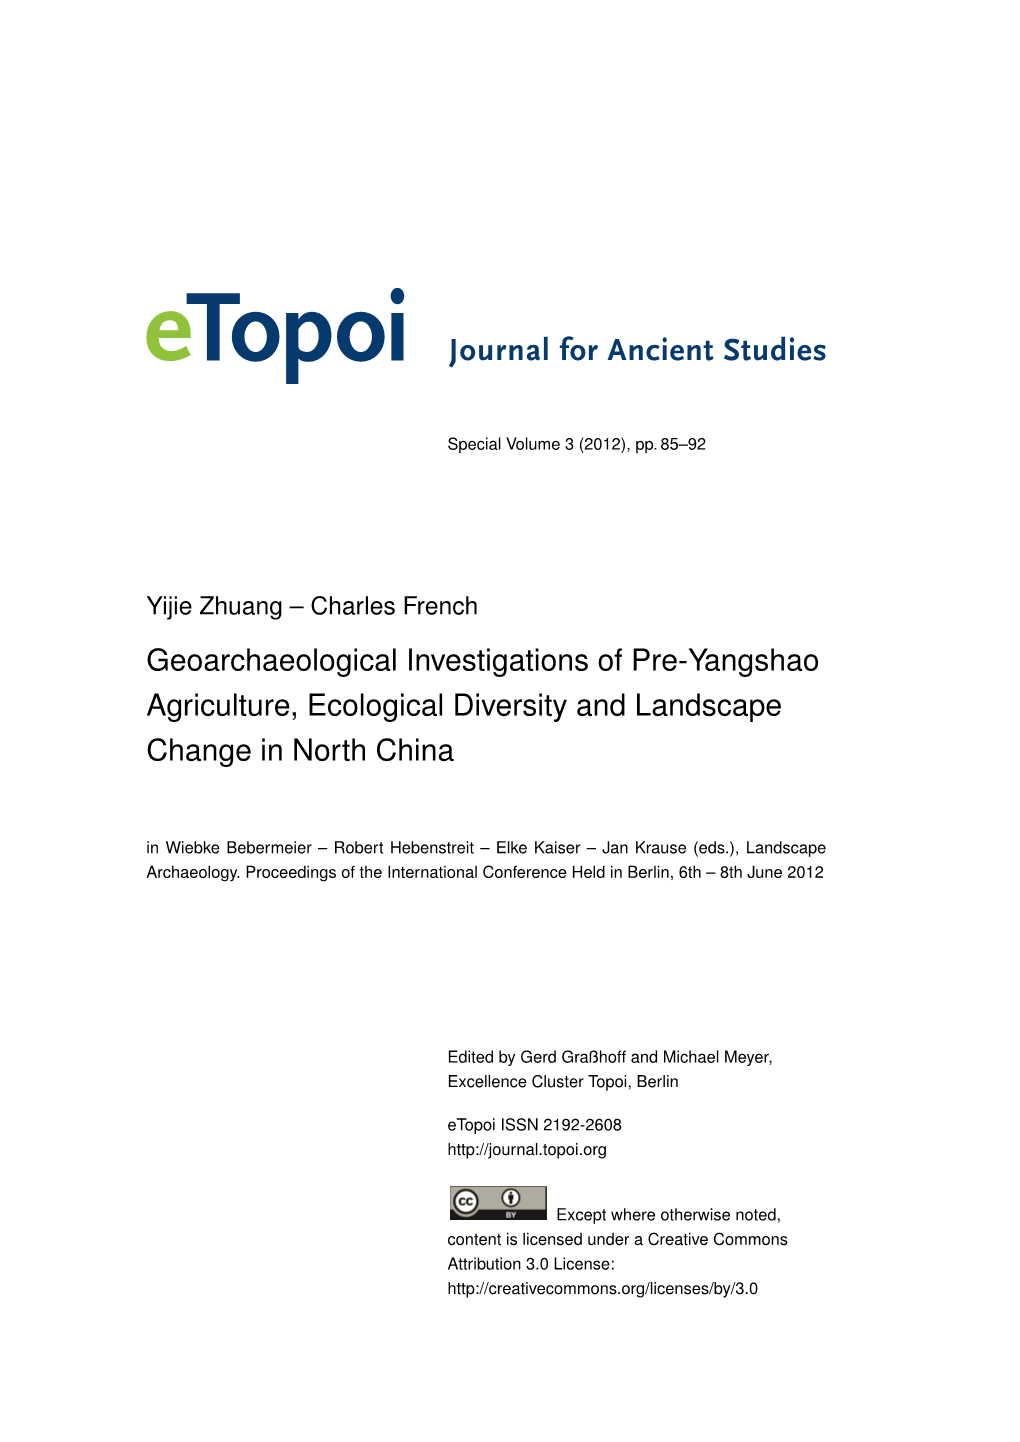 Geoarchaeological Investigations of Pre-Yangshao Agriculture, Ecological Diversity and Landscape Change in North China